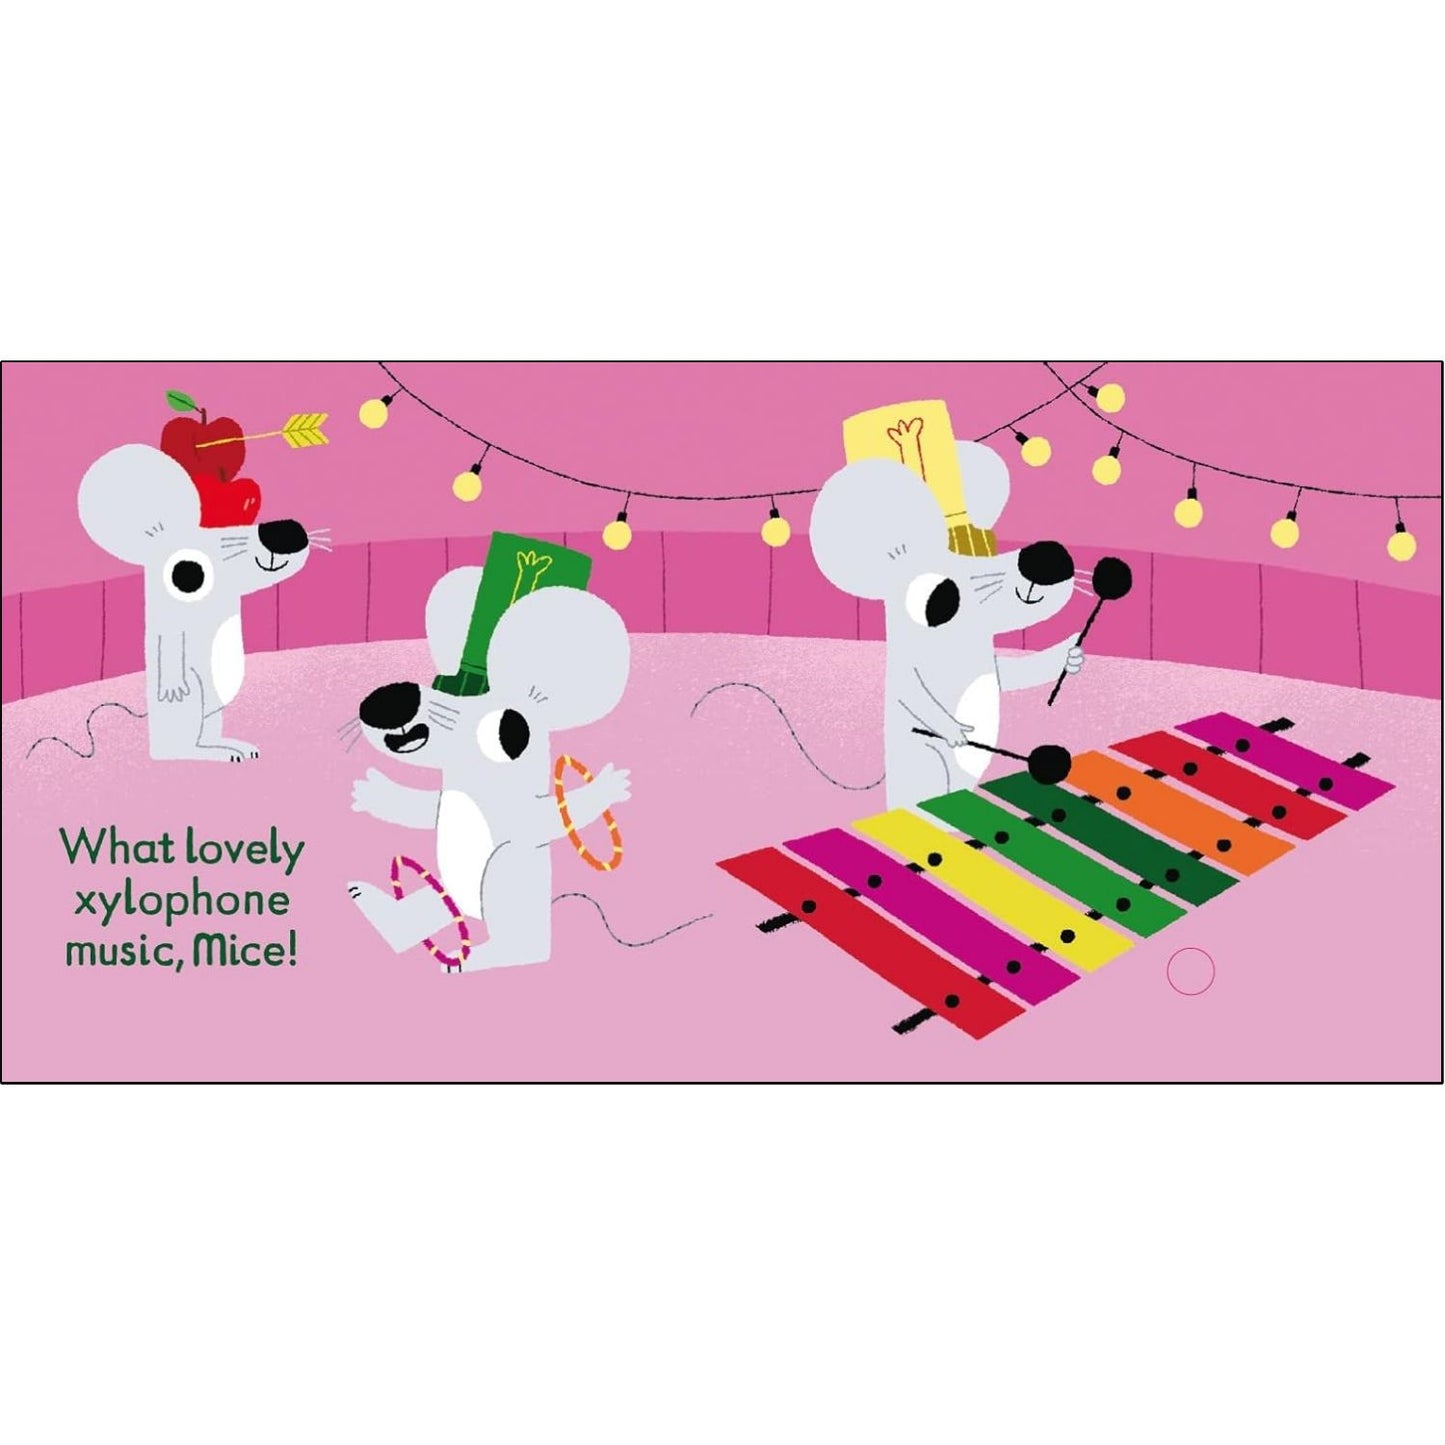 Listen to the Music | Interactive Board Book for Children